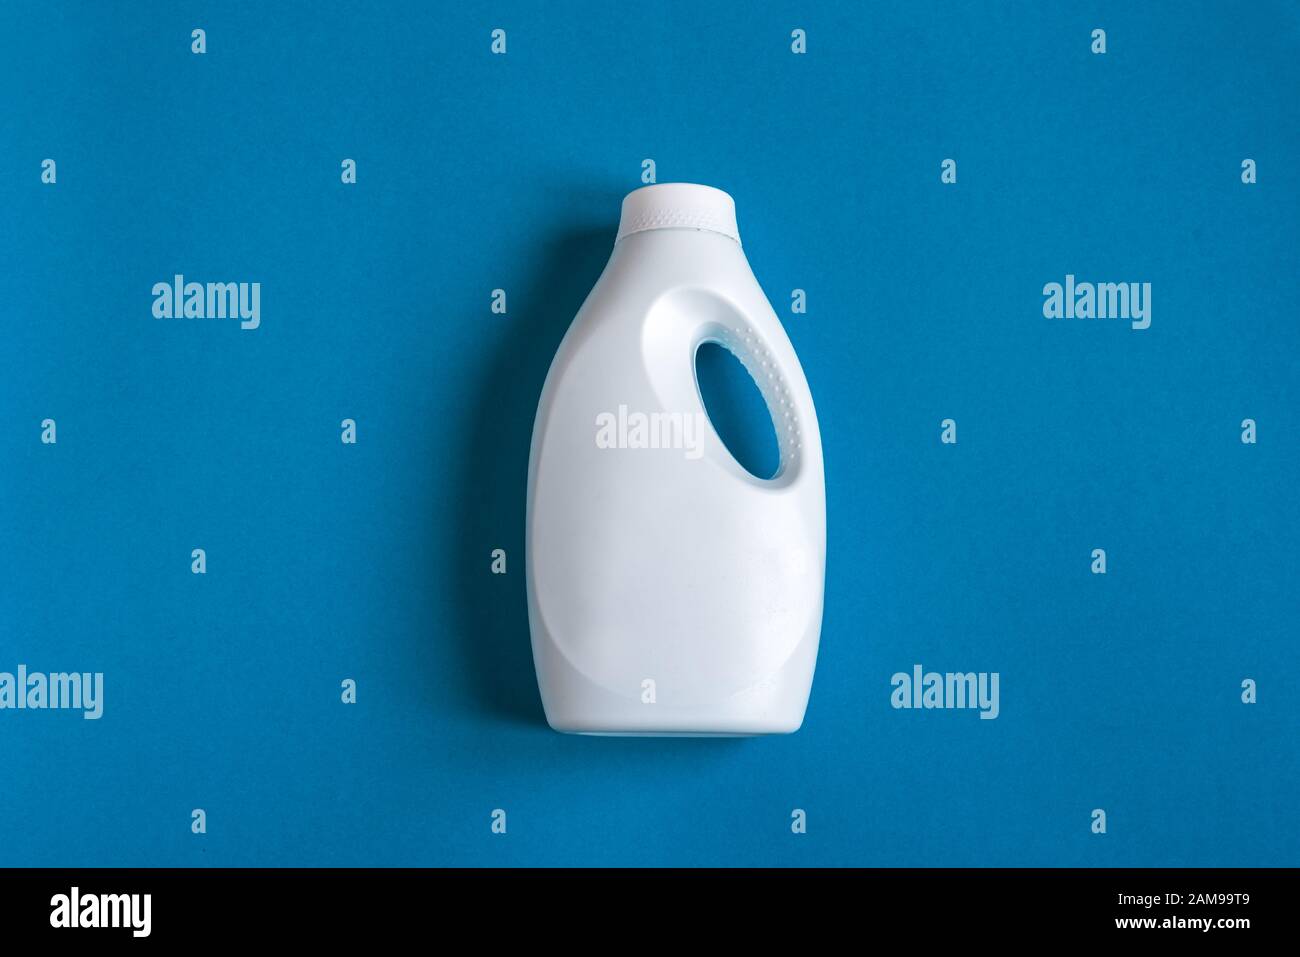 White plastic bottle of cleaning product, household chemicals or liquid laundry detergent on classic blue background, flat lay, top view, copy space. Stock Photo